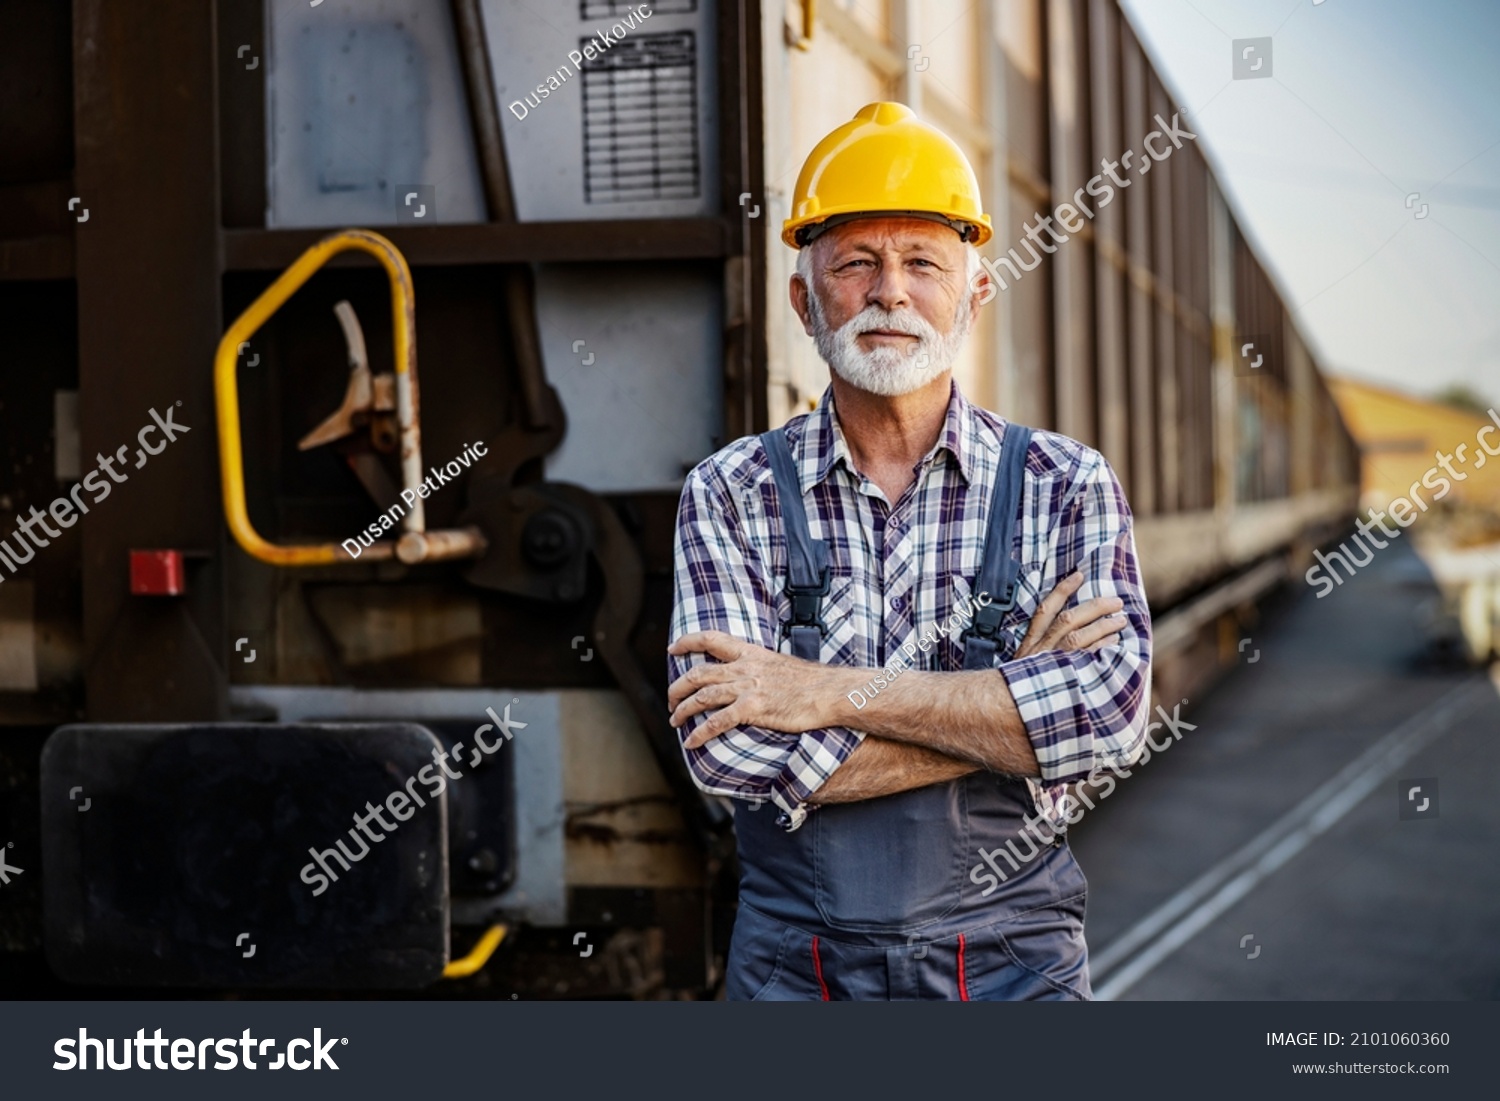 Industry transportation. A senior worker standing next to a wagon. A proud senior worker with a protective helmet on his head is standing with arms crossed next to a wagon. #2101060360